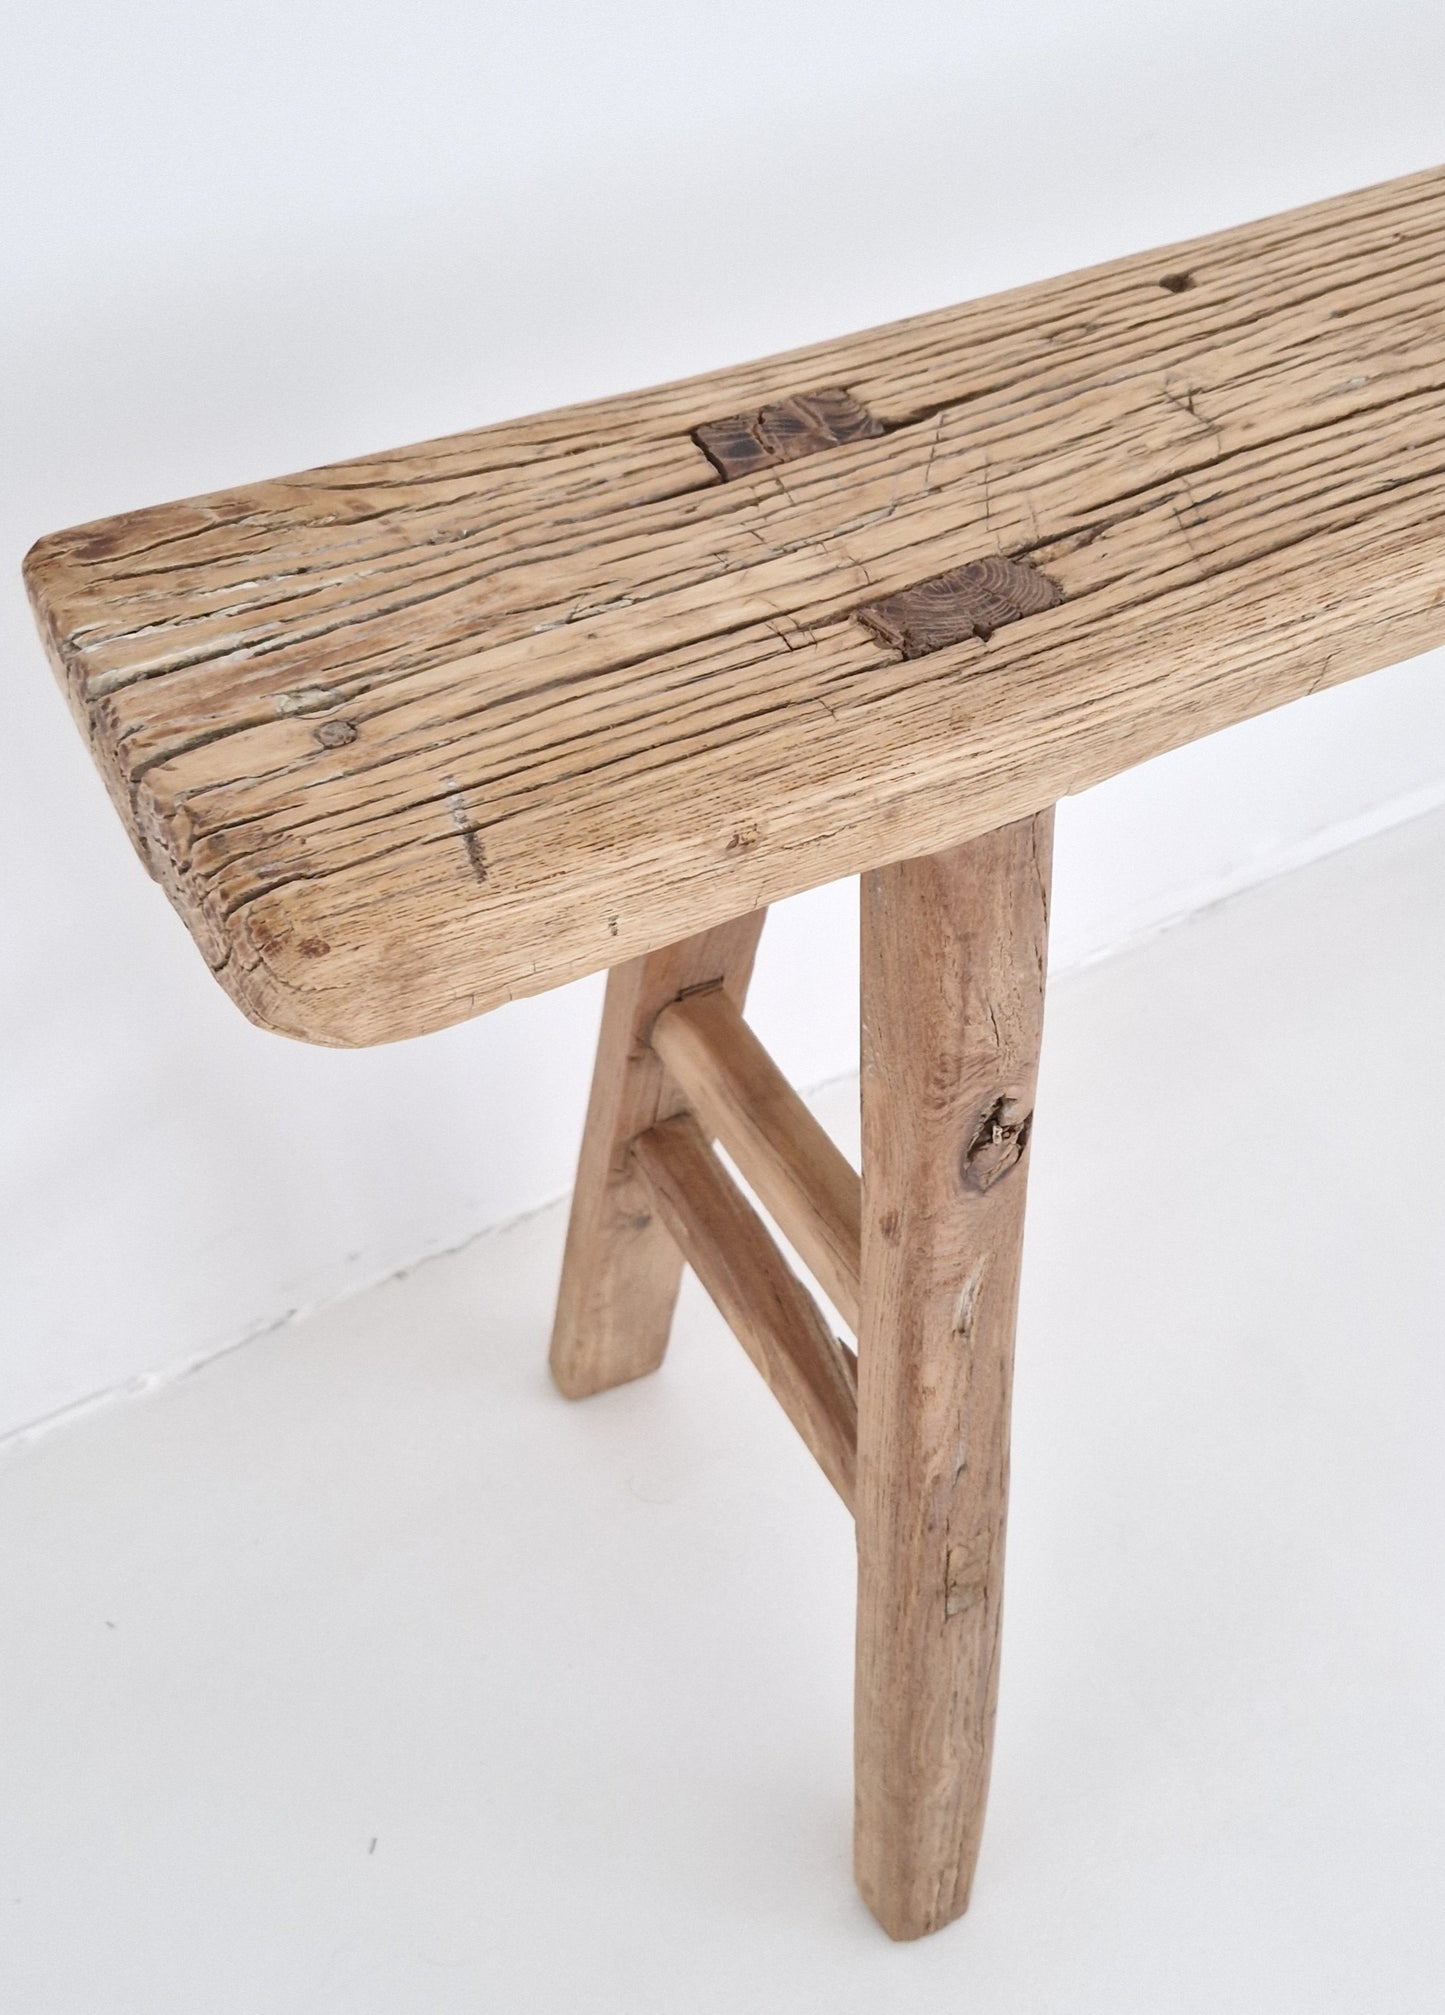 Old wooden bench #9 (114,5cm)